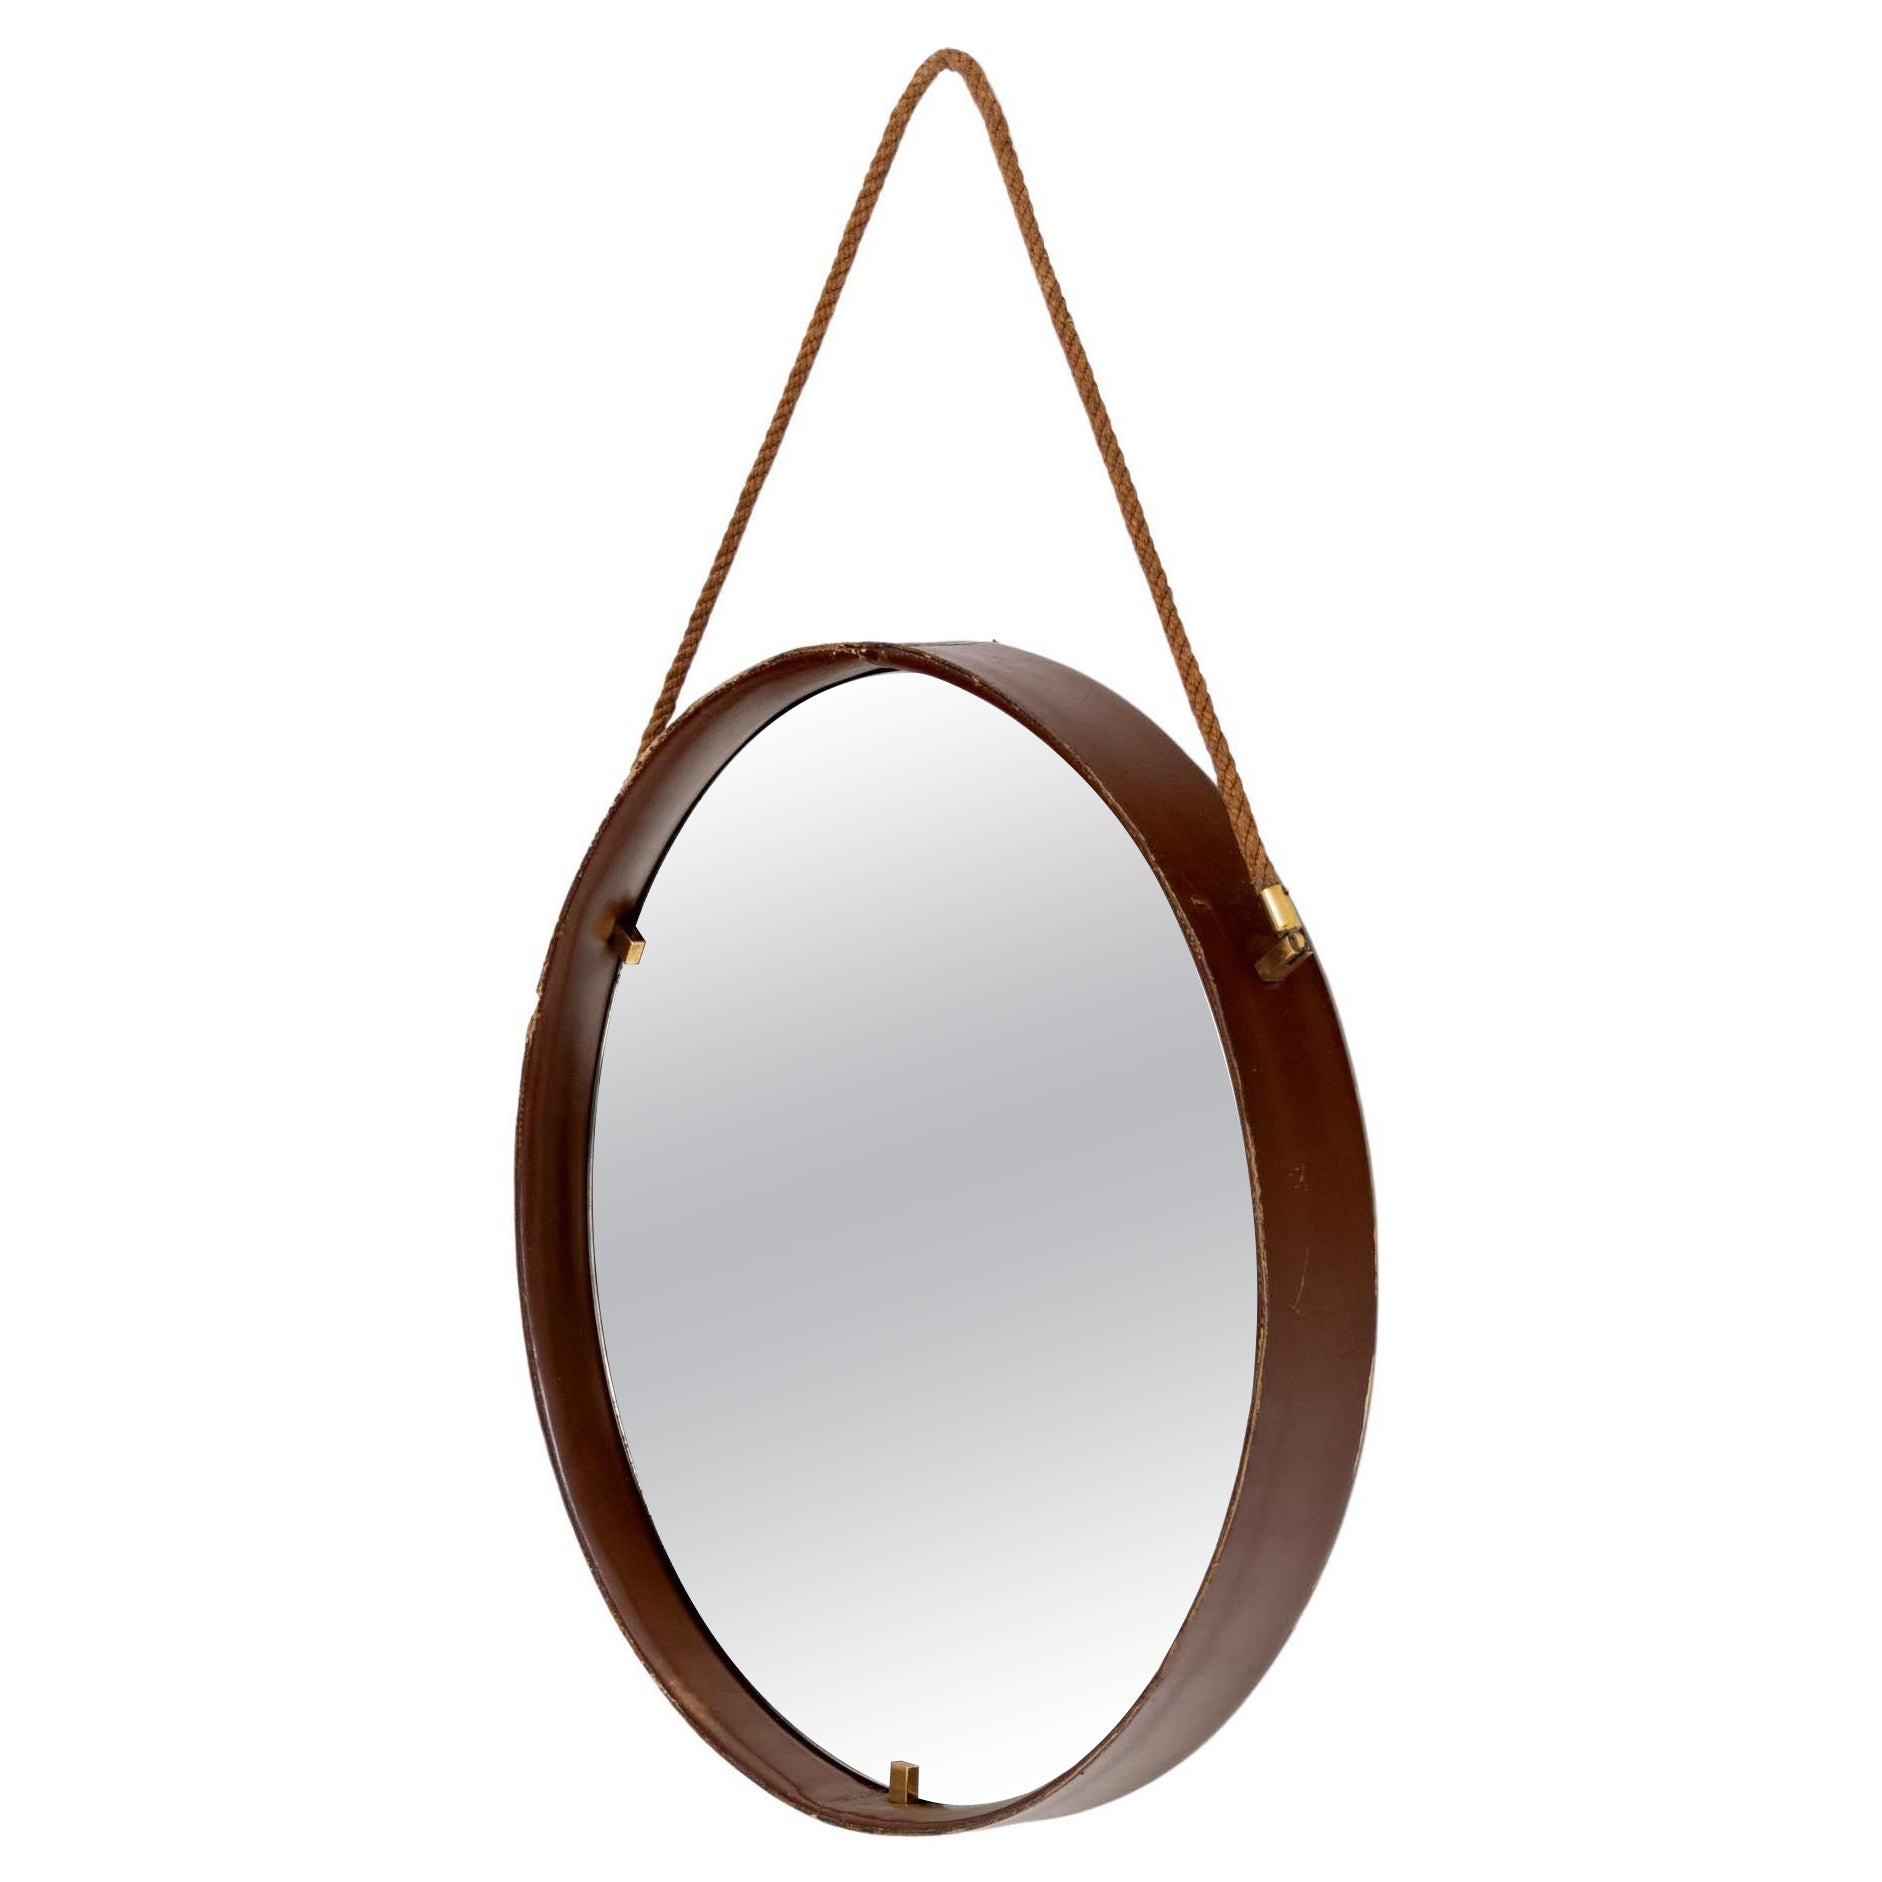 Round Wall Mirror with Leather Frame on a Rope, Italy Mid-20th Century